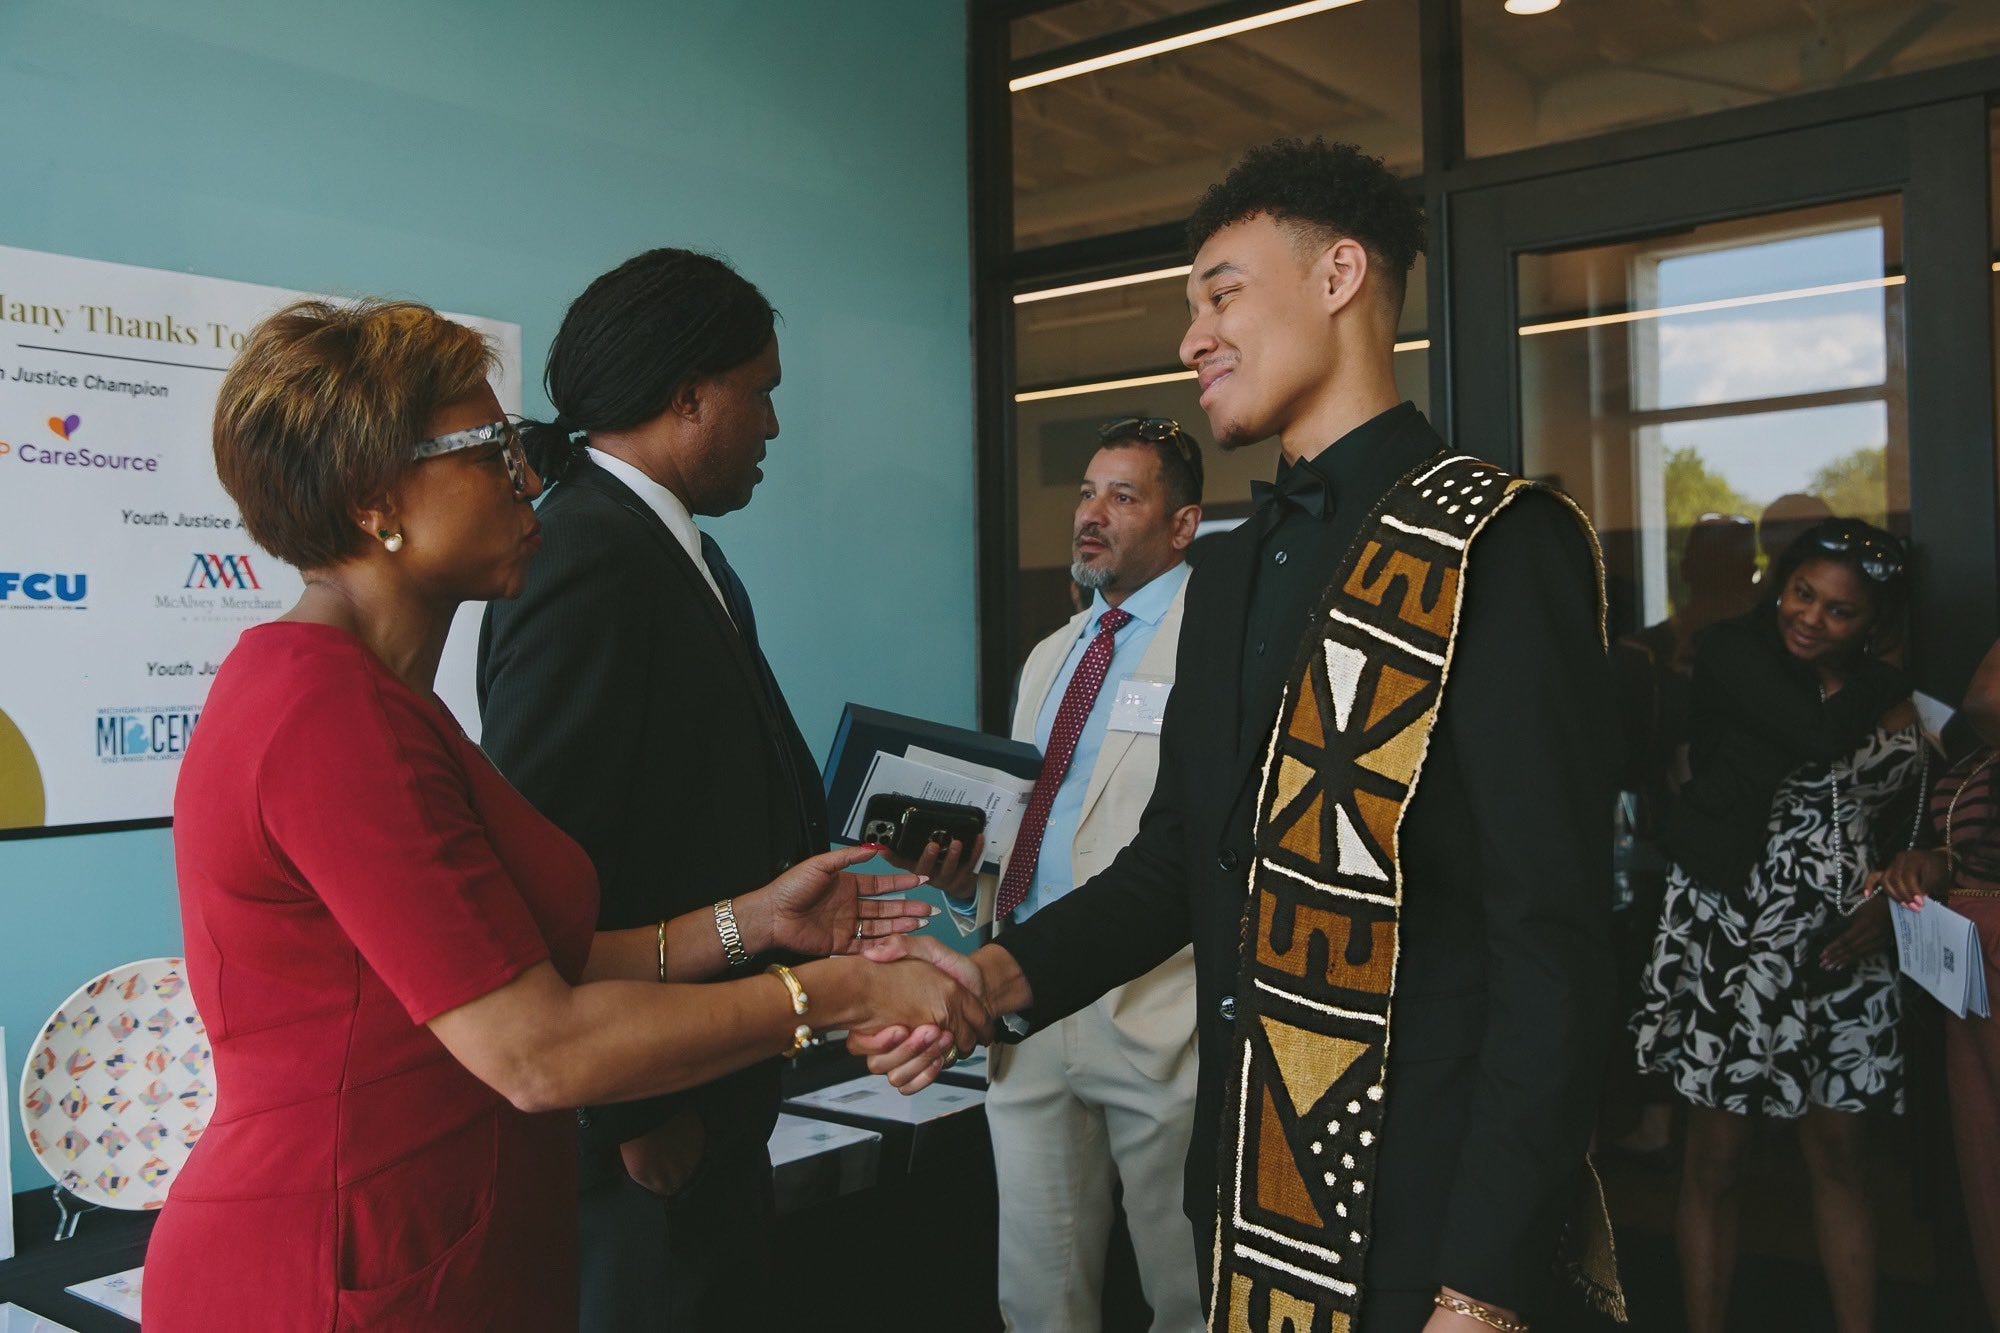 Cayden Brown handshake with Senator Sylvia Santana as they recieve advoacay awards from the Michigan Center for Youth Justice